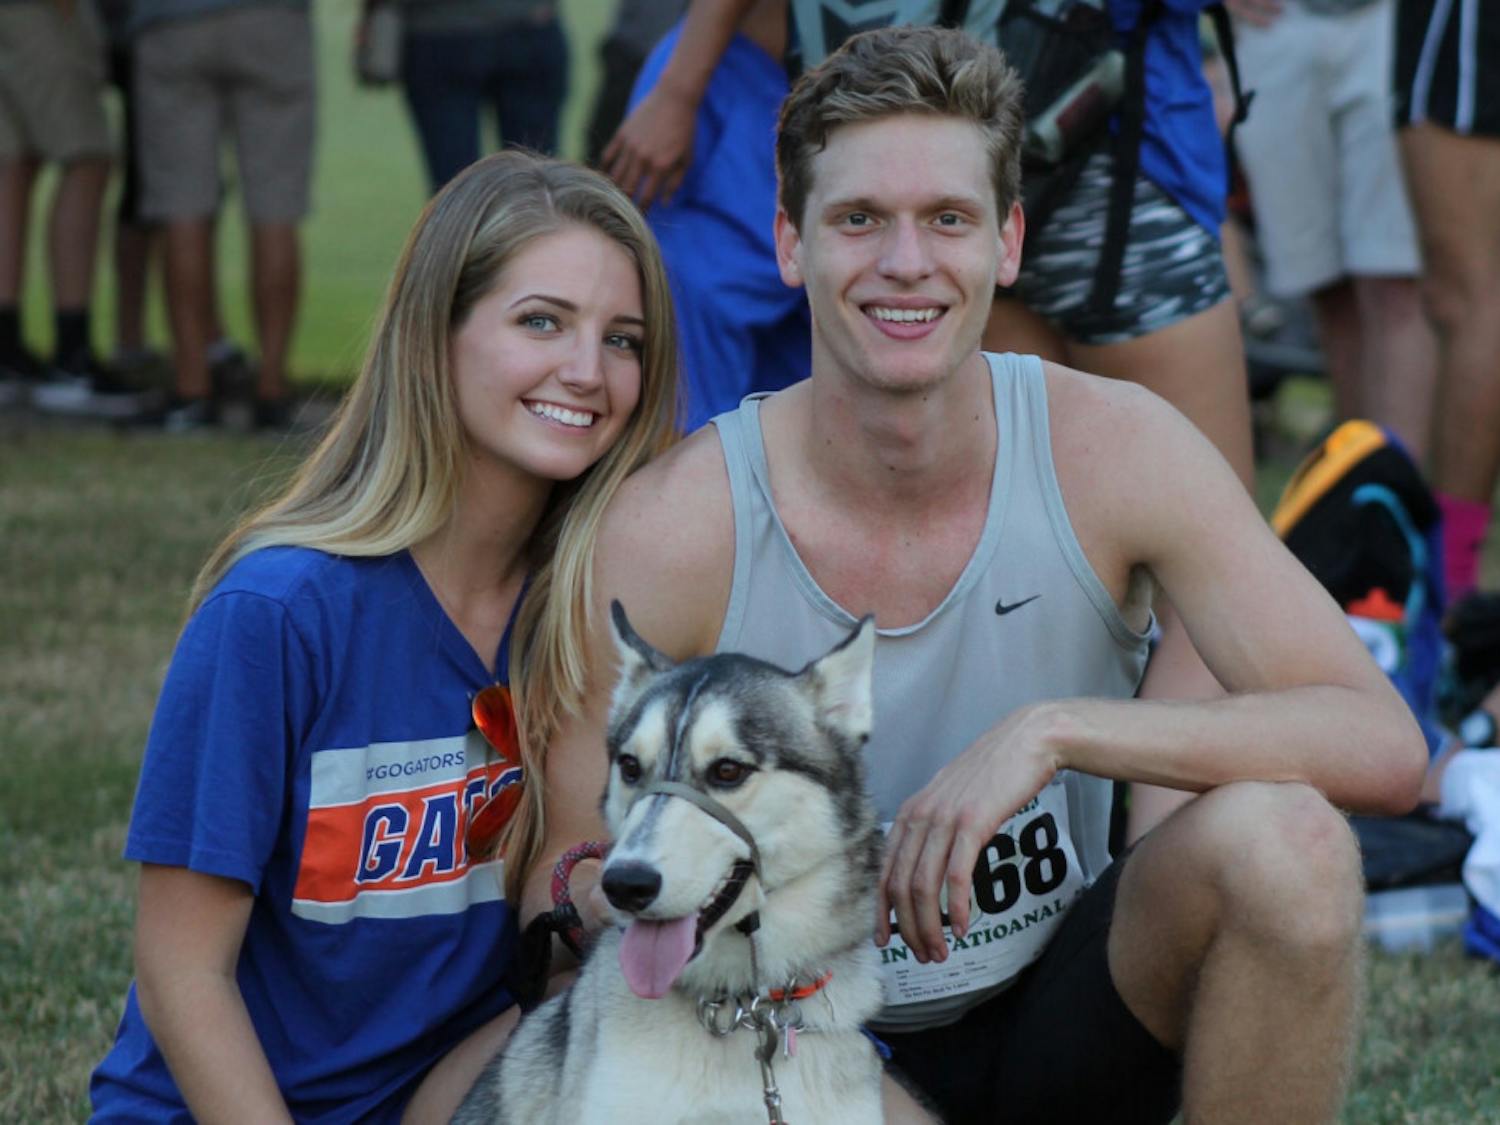 UF cross country runner Jack Rogers (right), his girlfriend, Madison Dixon (left), Jack's mother's dog, Mateo, pose for a photo after the 2015 USF invitational.
&nbsp;